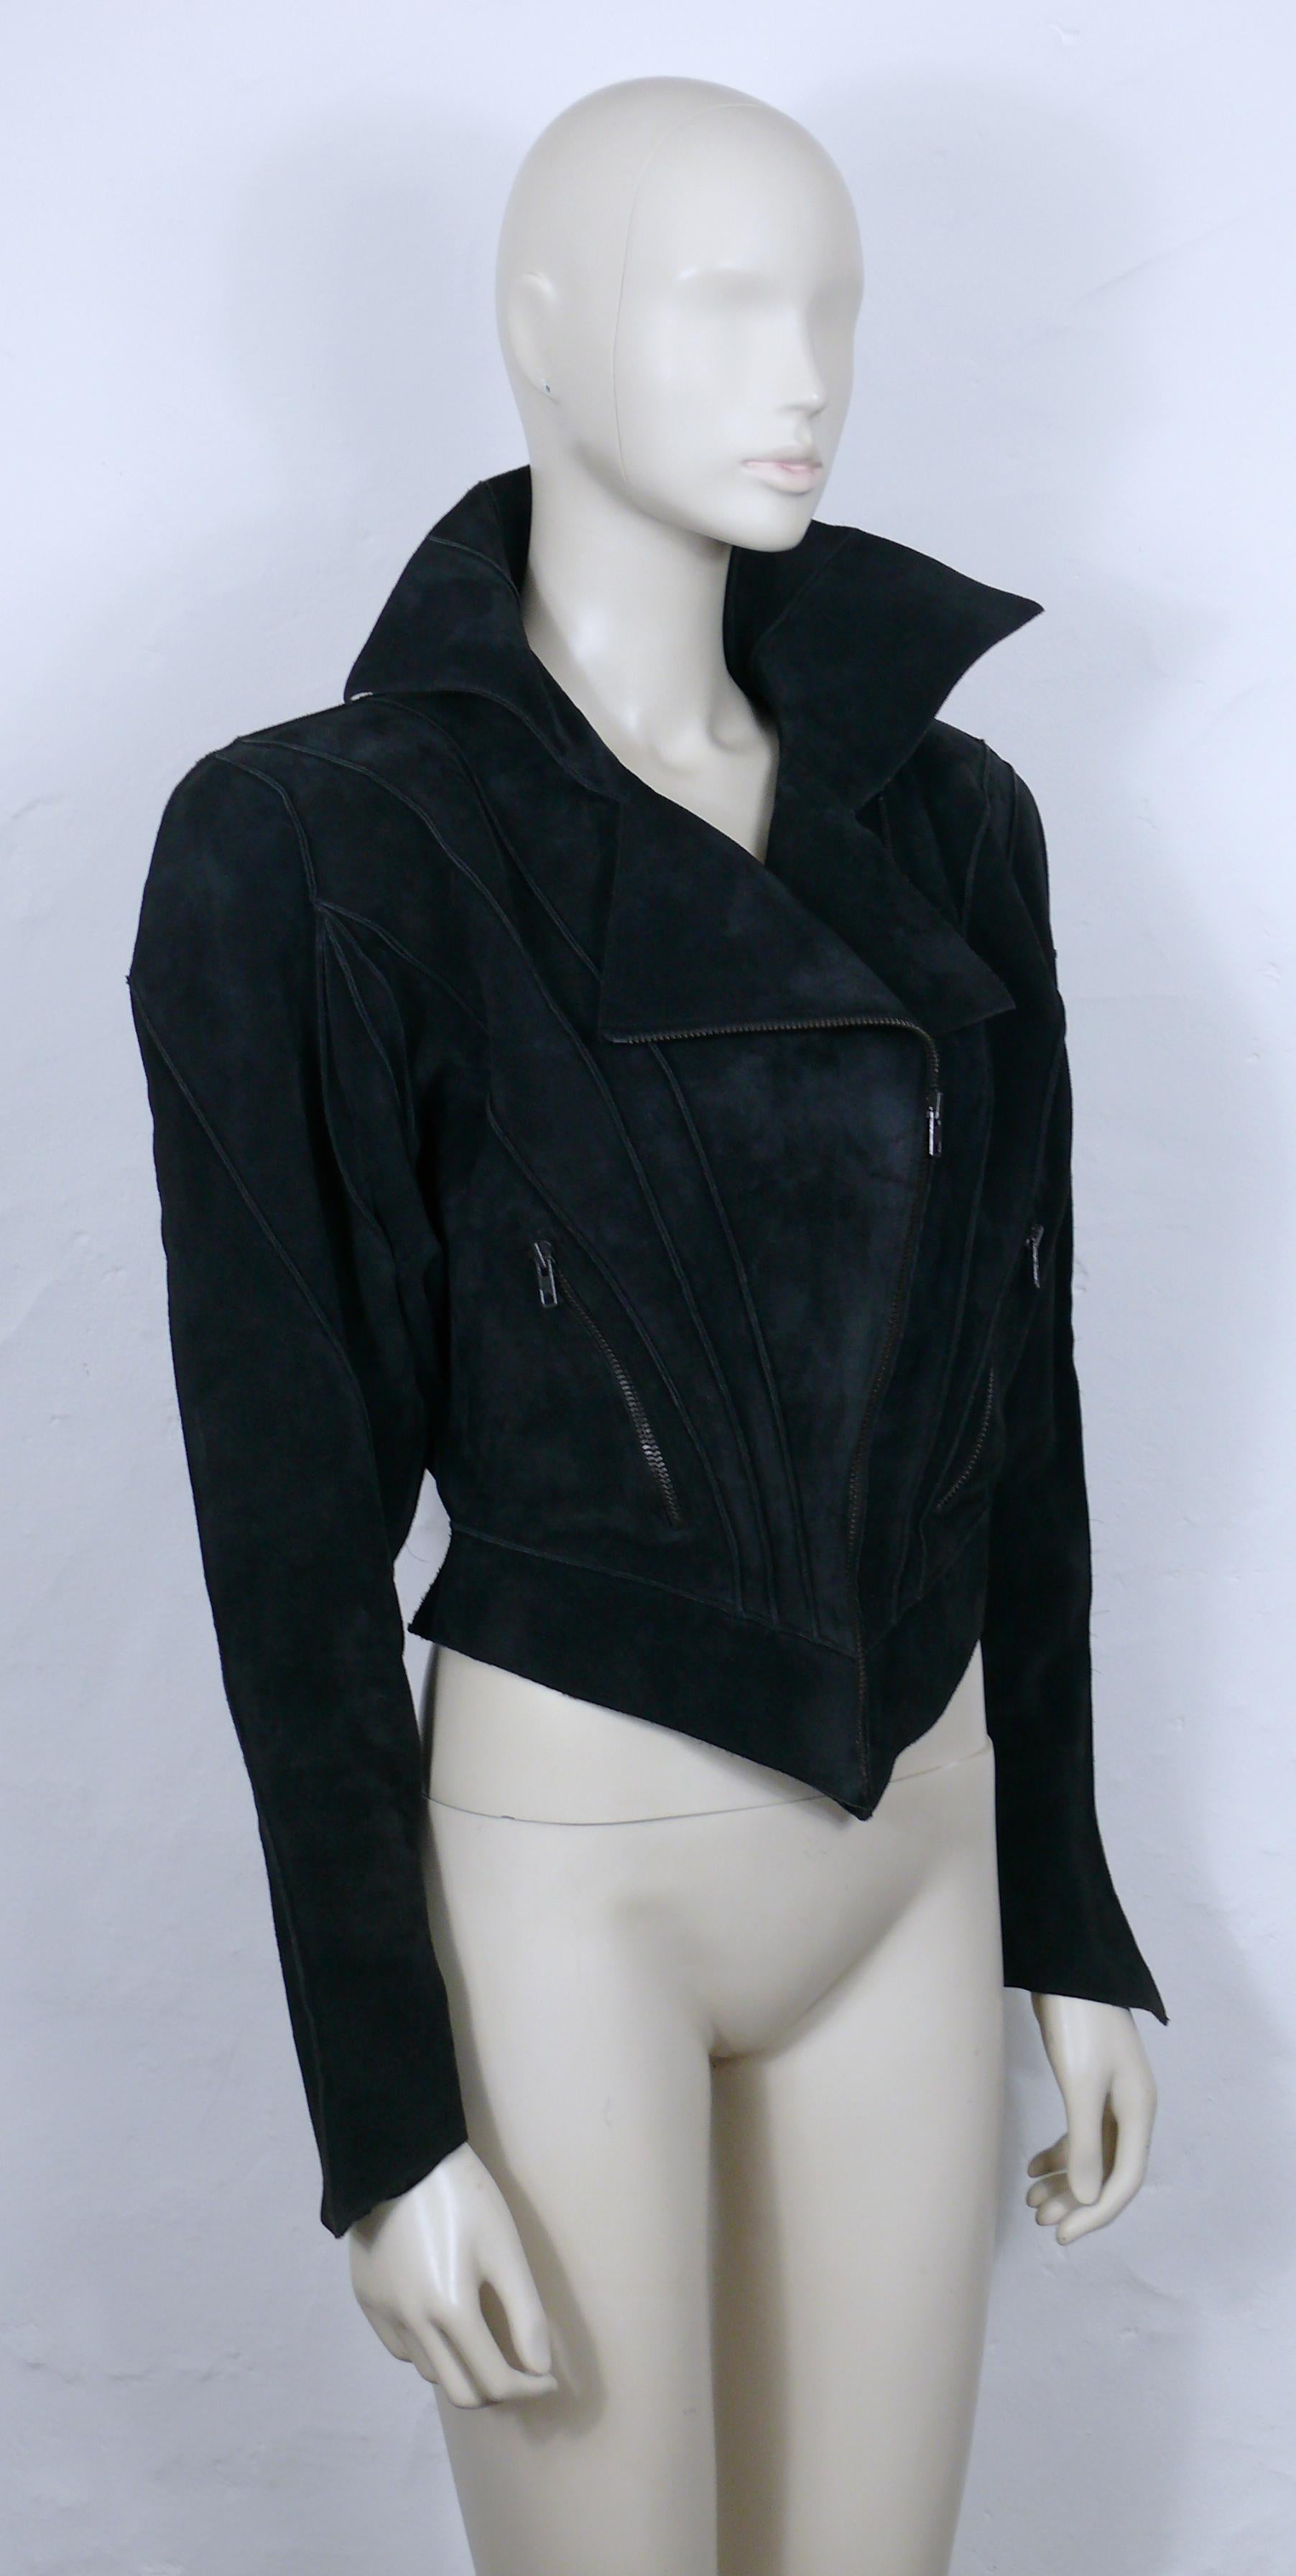 THIERRY MUGLER vintage rare black suede creature jacket.

This jacket features :
- Typical THIERRY MUGLER's sculptural cut and aesthetic with exaggerated shoulders and marked waist.
- Long bat sleeves.
- Stand-up collar.
- Asymetric front down